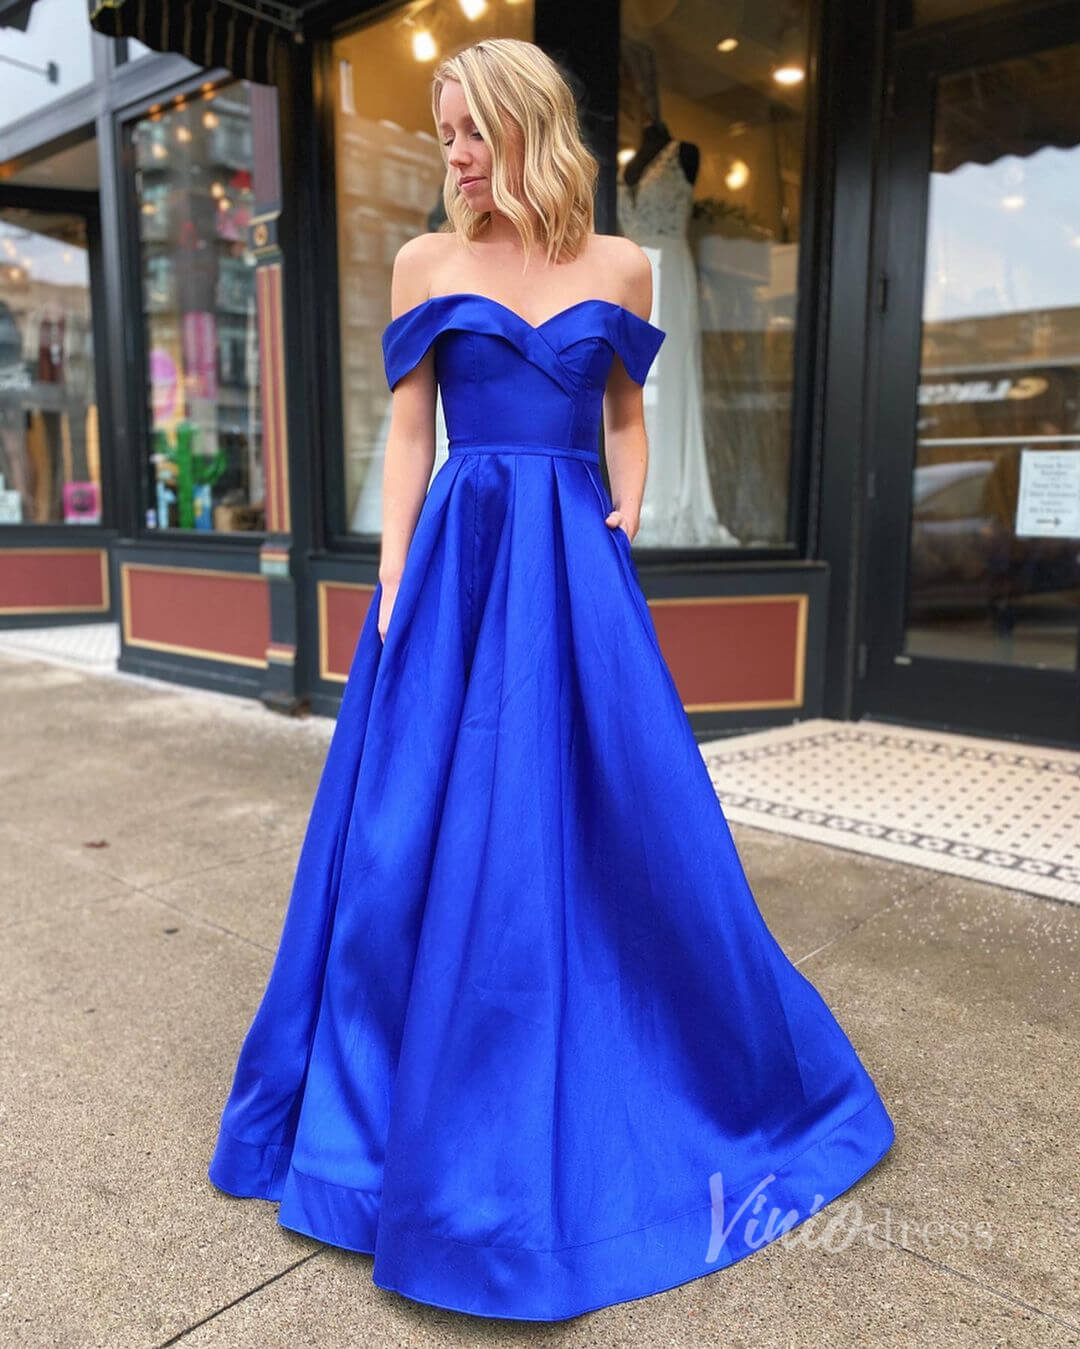 Simple Royal Blue Satin Prom Dresses Off the Shoulder FD2853-prom dresses-Viniodress-Viniodress